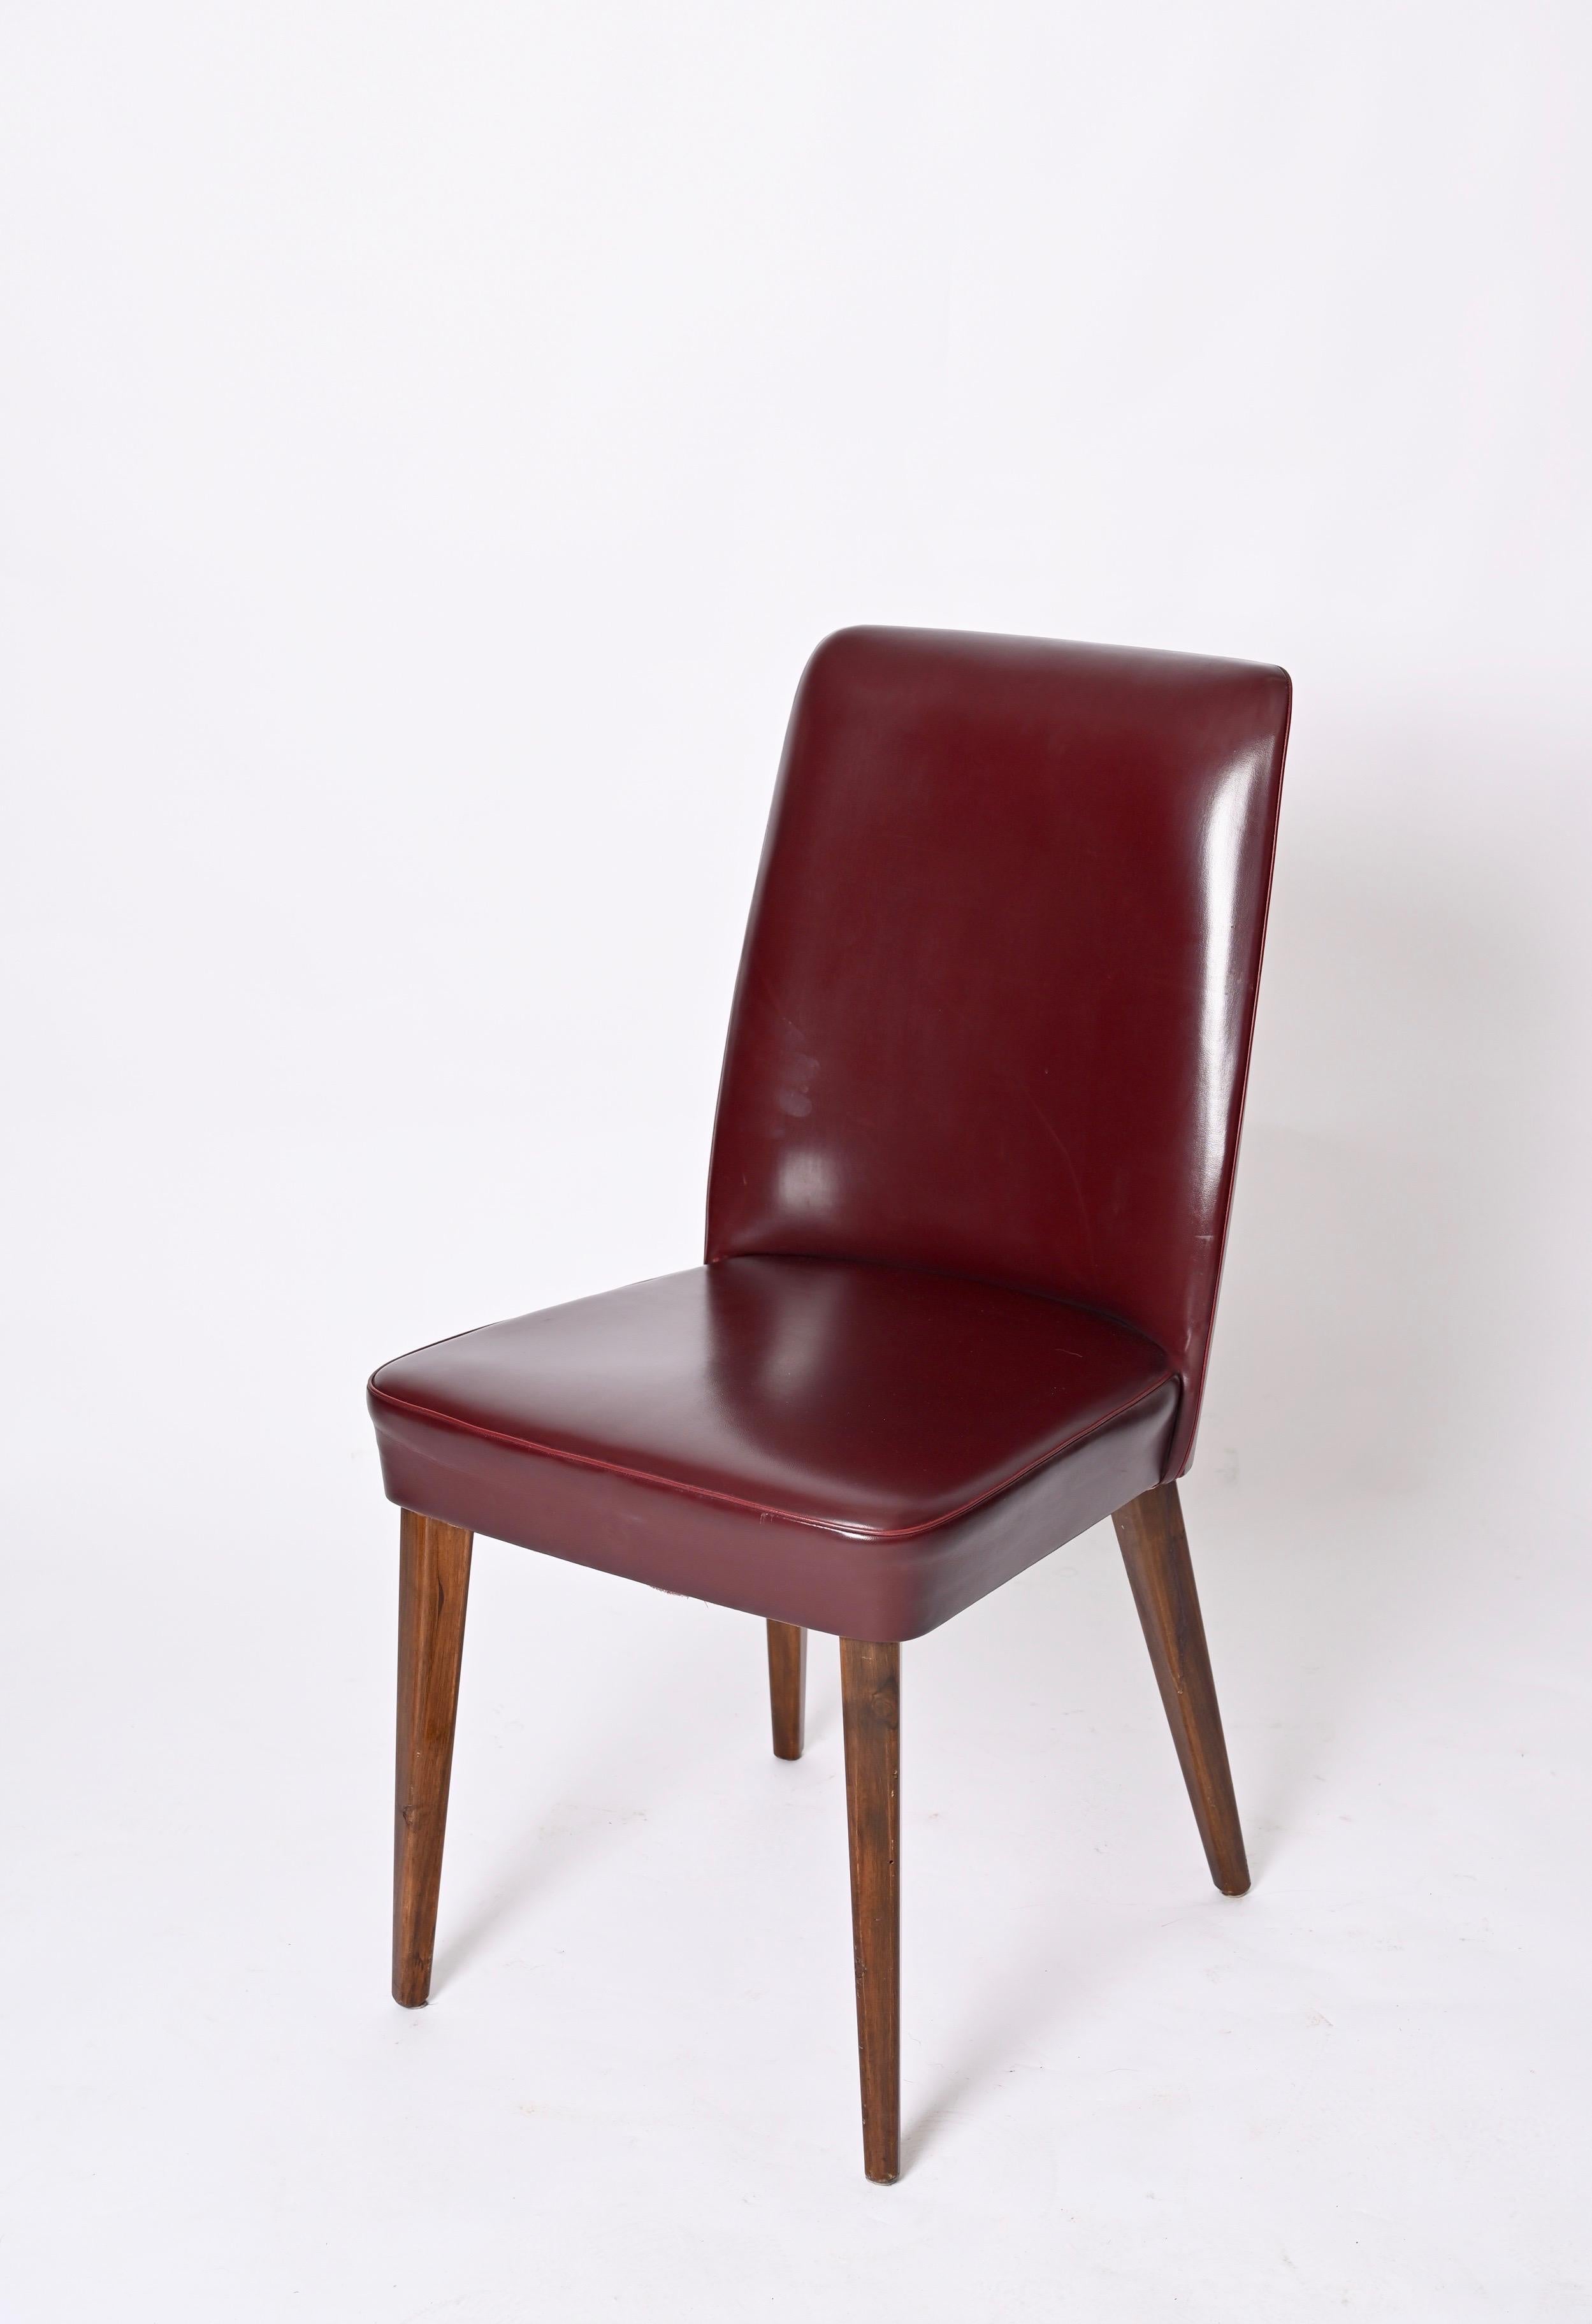 Italian Pair of Bordeaux Leather Chairs by Anonima Castelli, Italy, 1950s For Sale